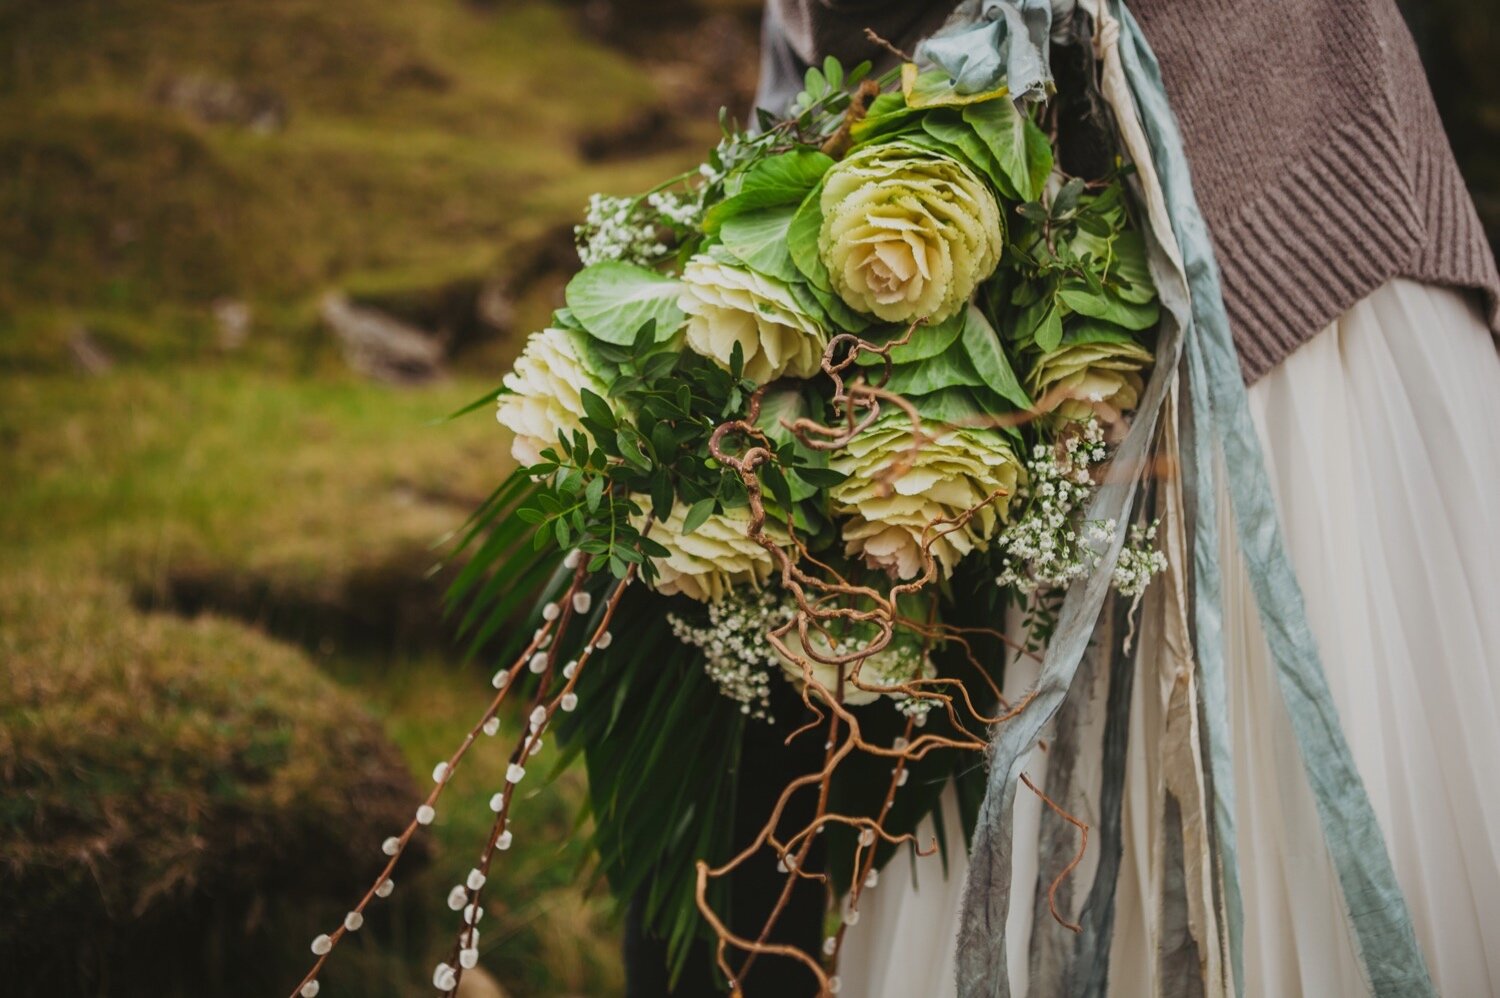 17_TWS-119__grey_dramatic_landscape_alternative_elope_alt_rock_blue_waterfall_winter_flowers_offbeat_dales_waterfalls_autumn_elopement_photography_ribbons_moody_bride_silver_wedding_yorkshire_rainy_cloudy_cosy_weather_photographer_florals_groom.jpg